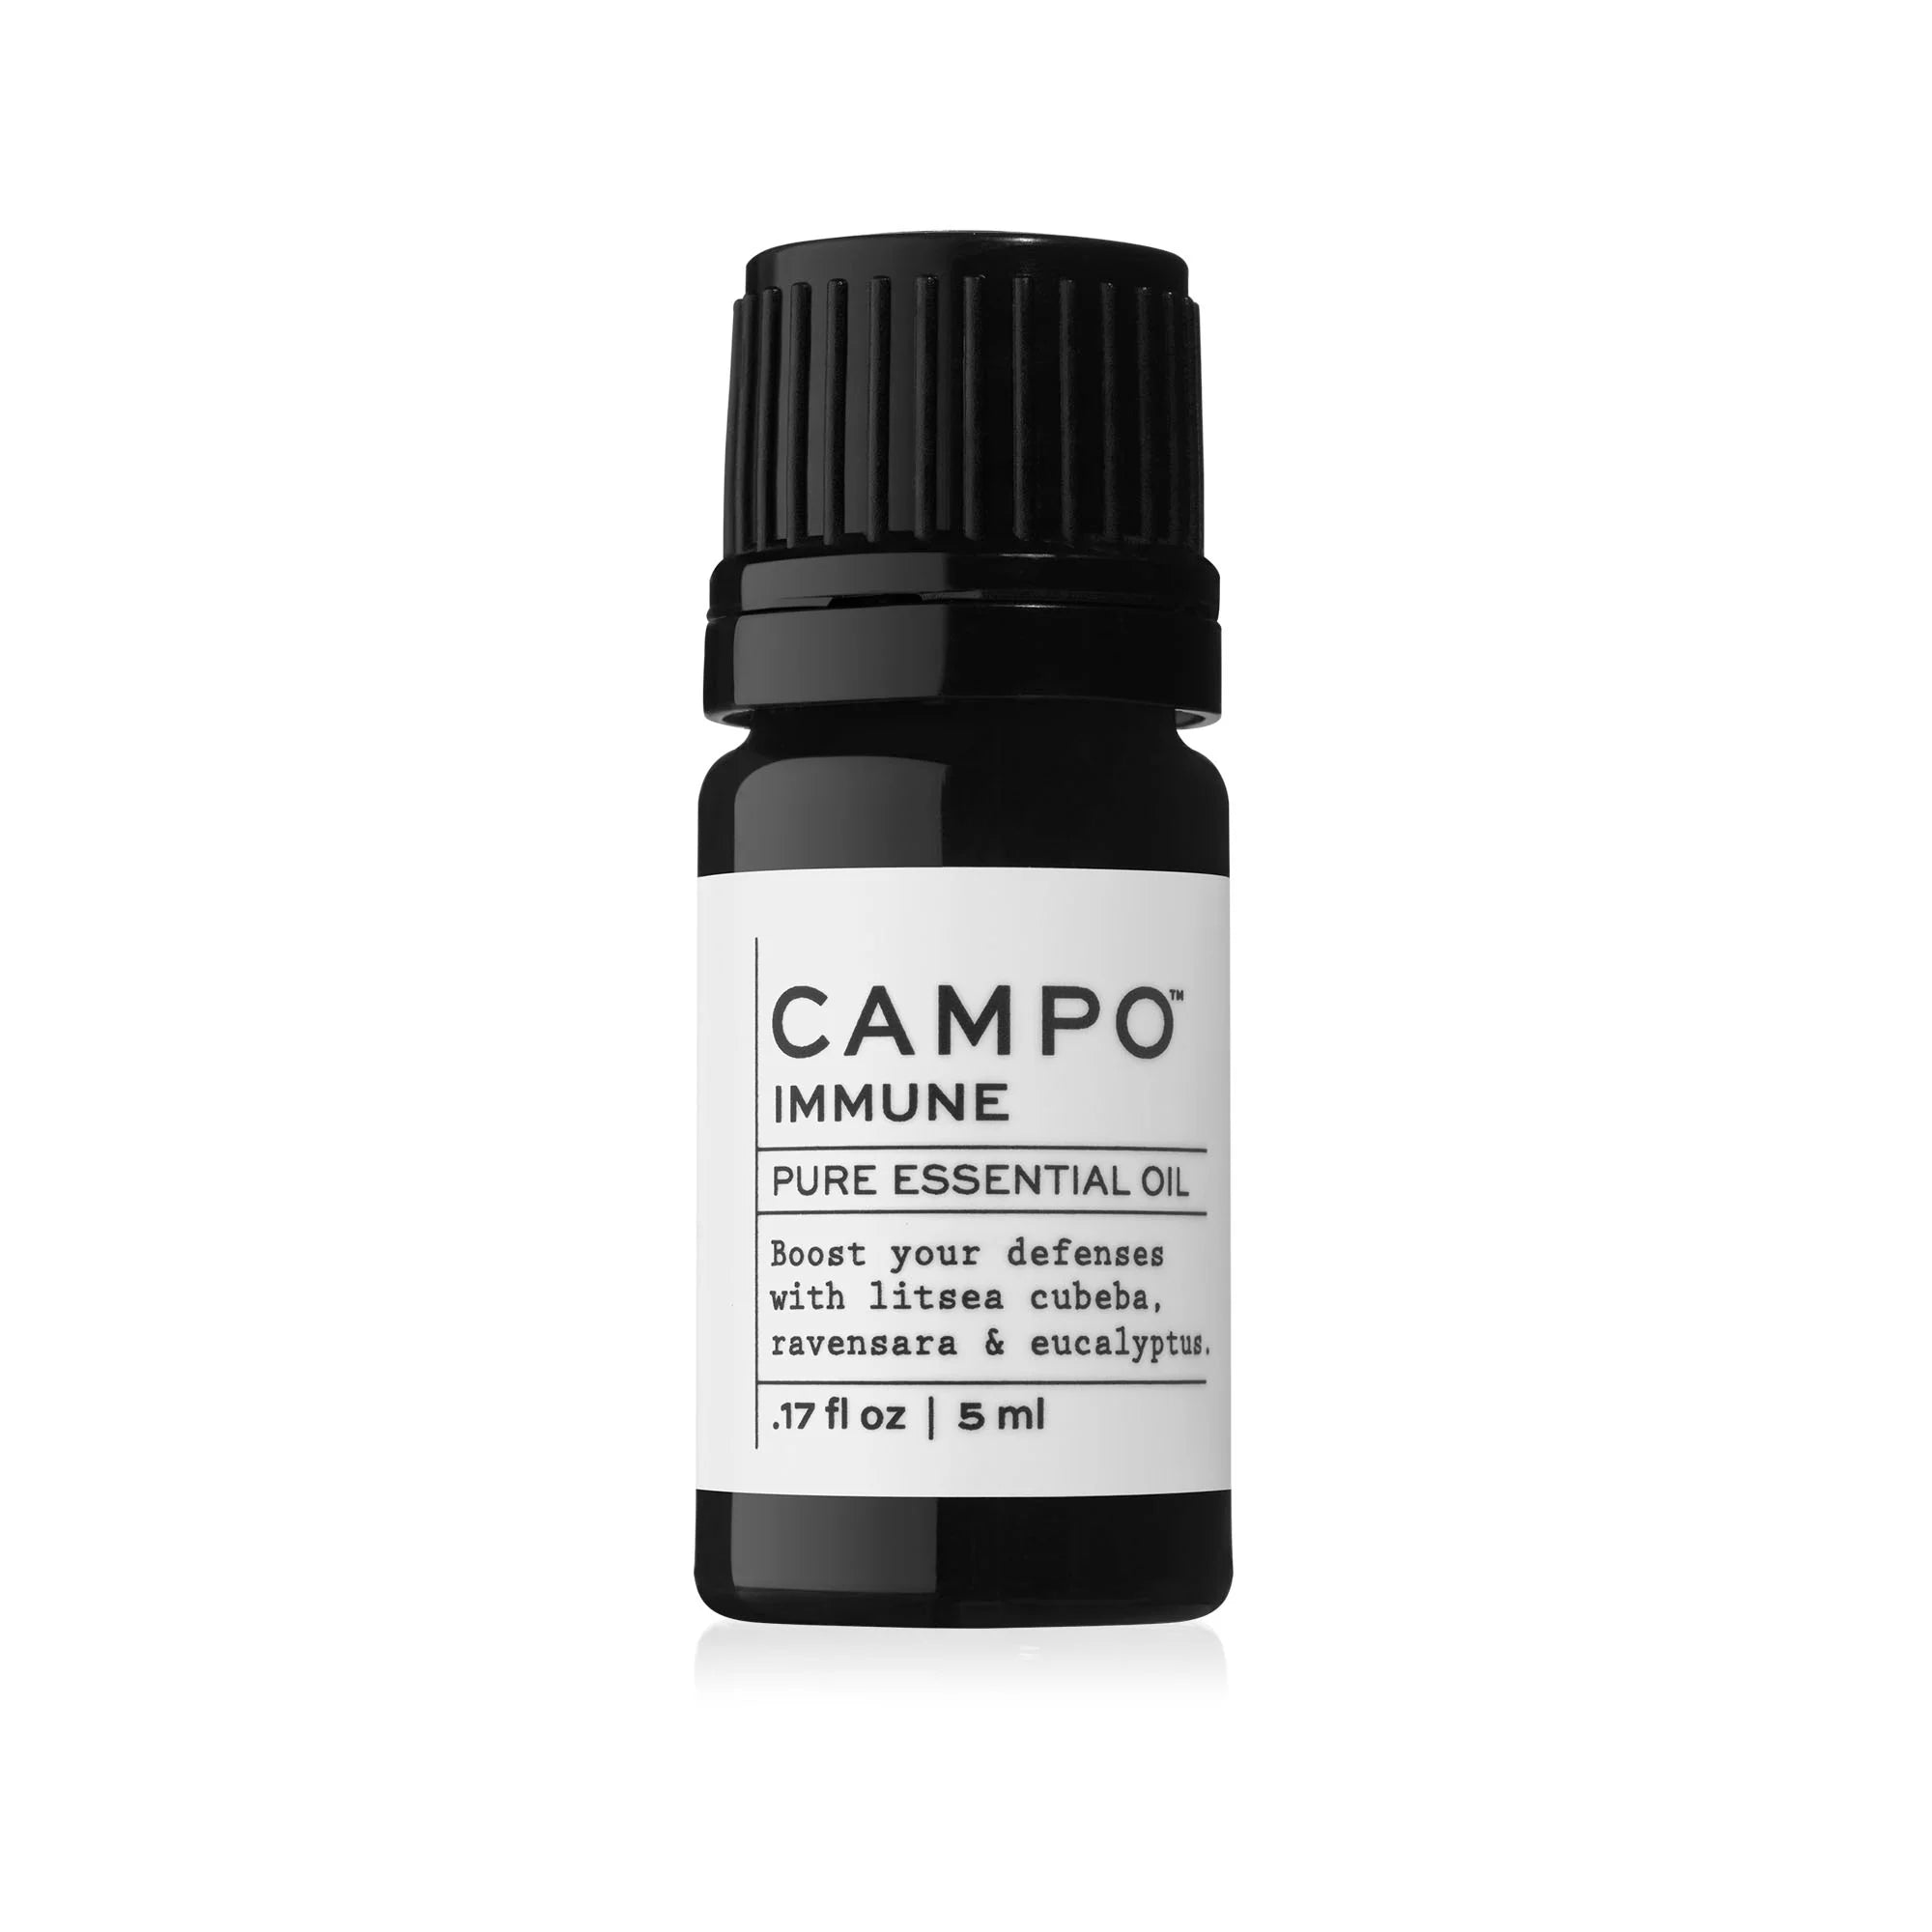 Campo Beauty Essential Oil Blend - Immune